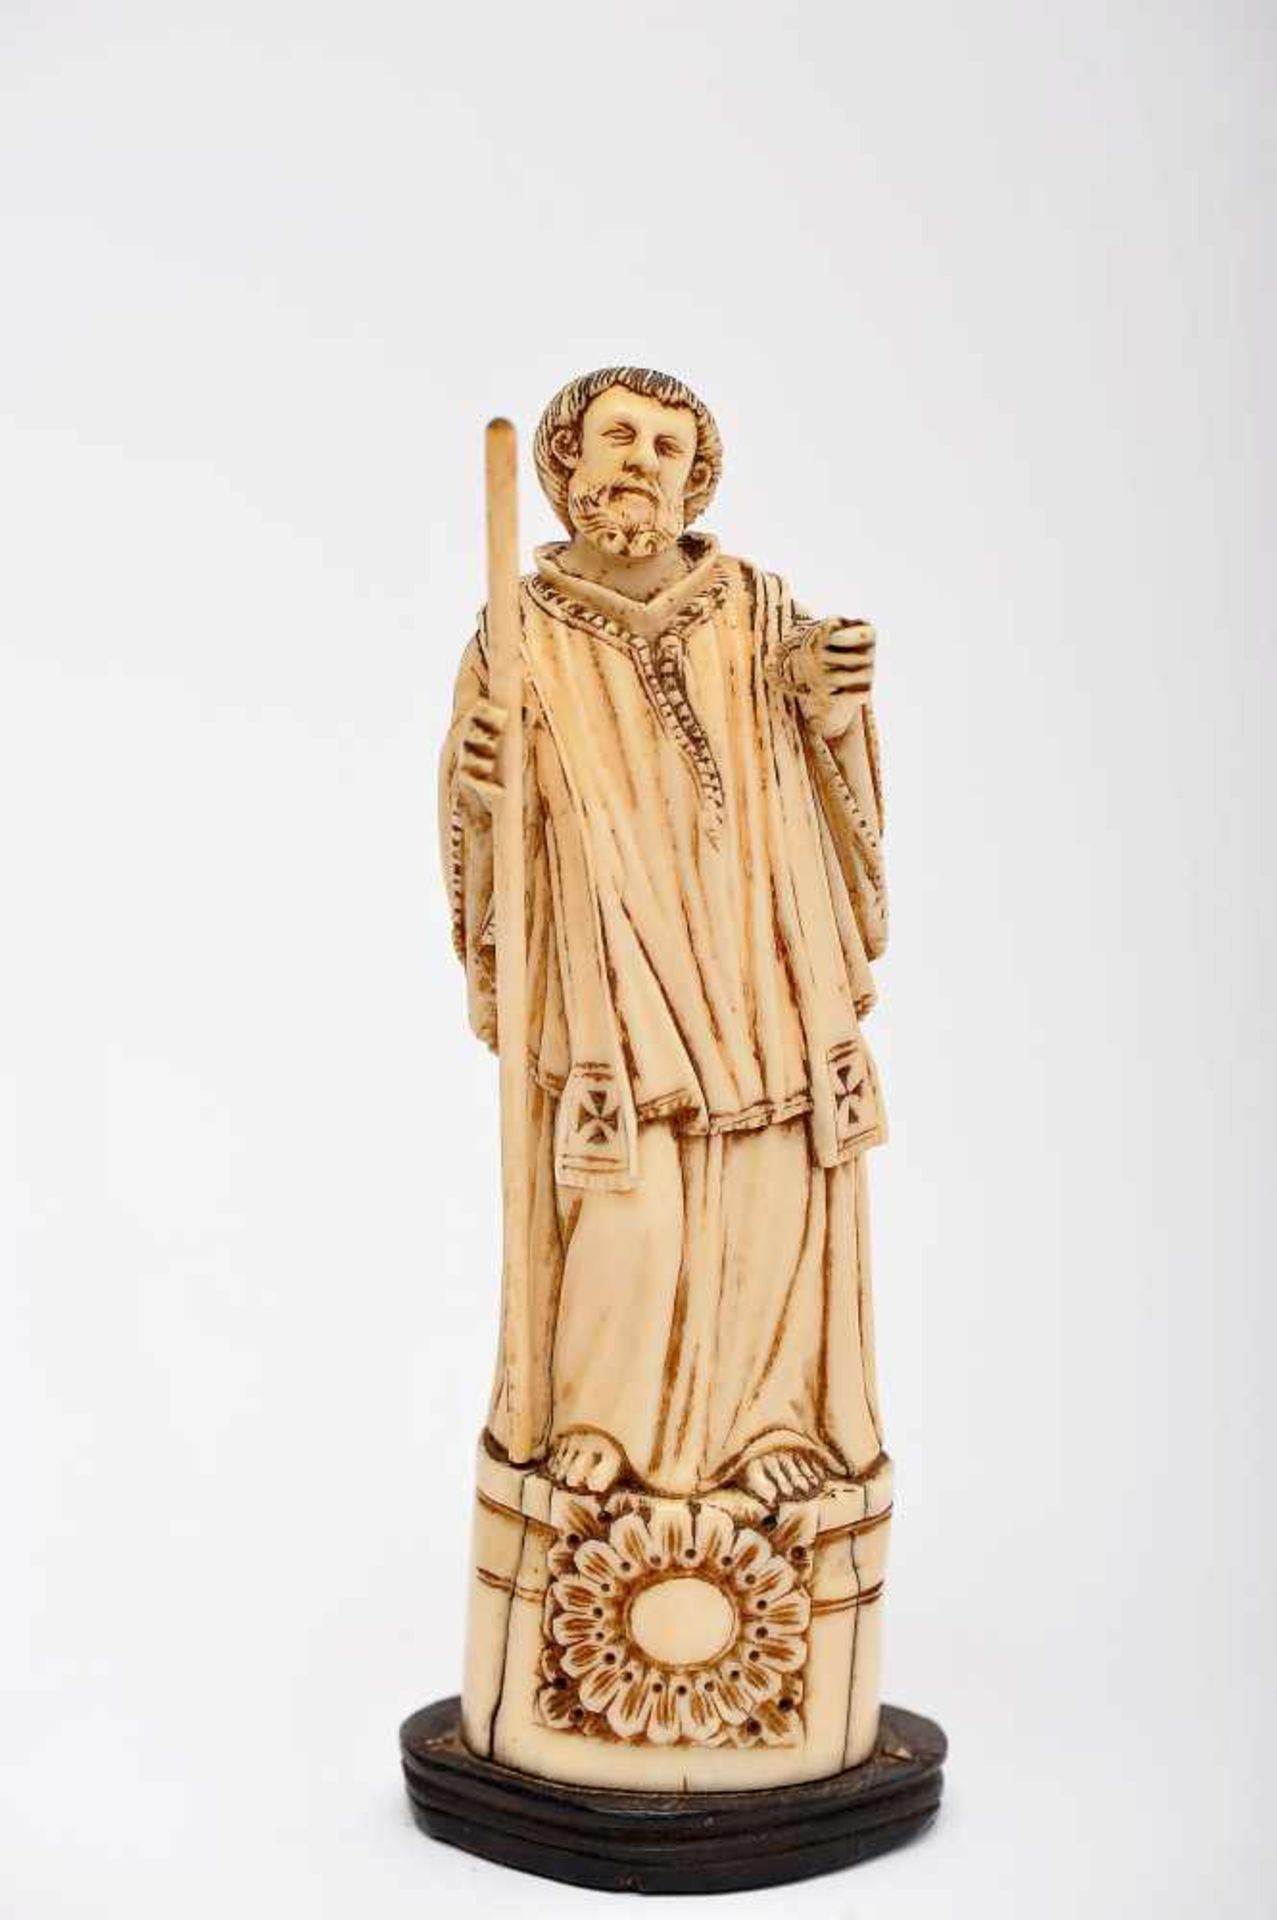 Saint Francis Xavier, ivory sculpture, ebony stand, Indo-Portuguese, 18th/19th C., missing of part